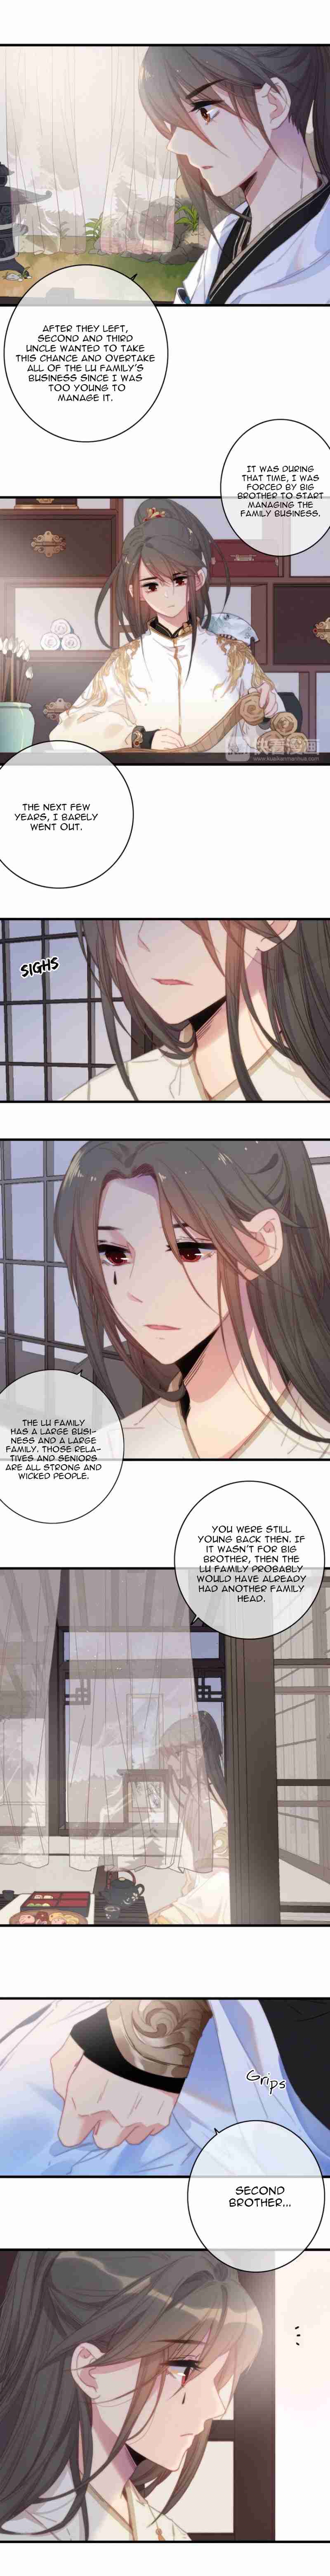 The Love's Oath Ch. 36 Big Brother's Scheme